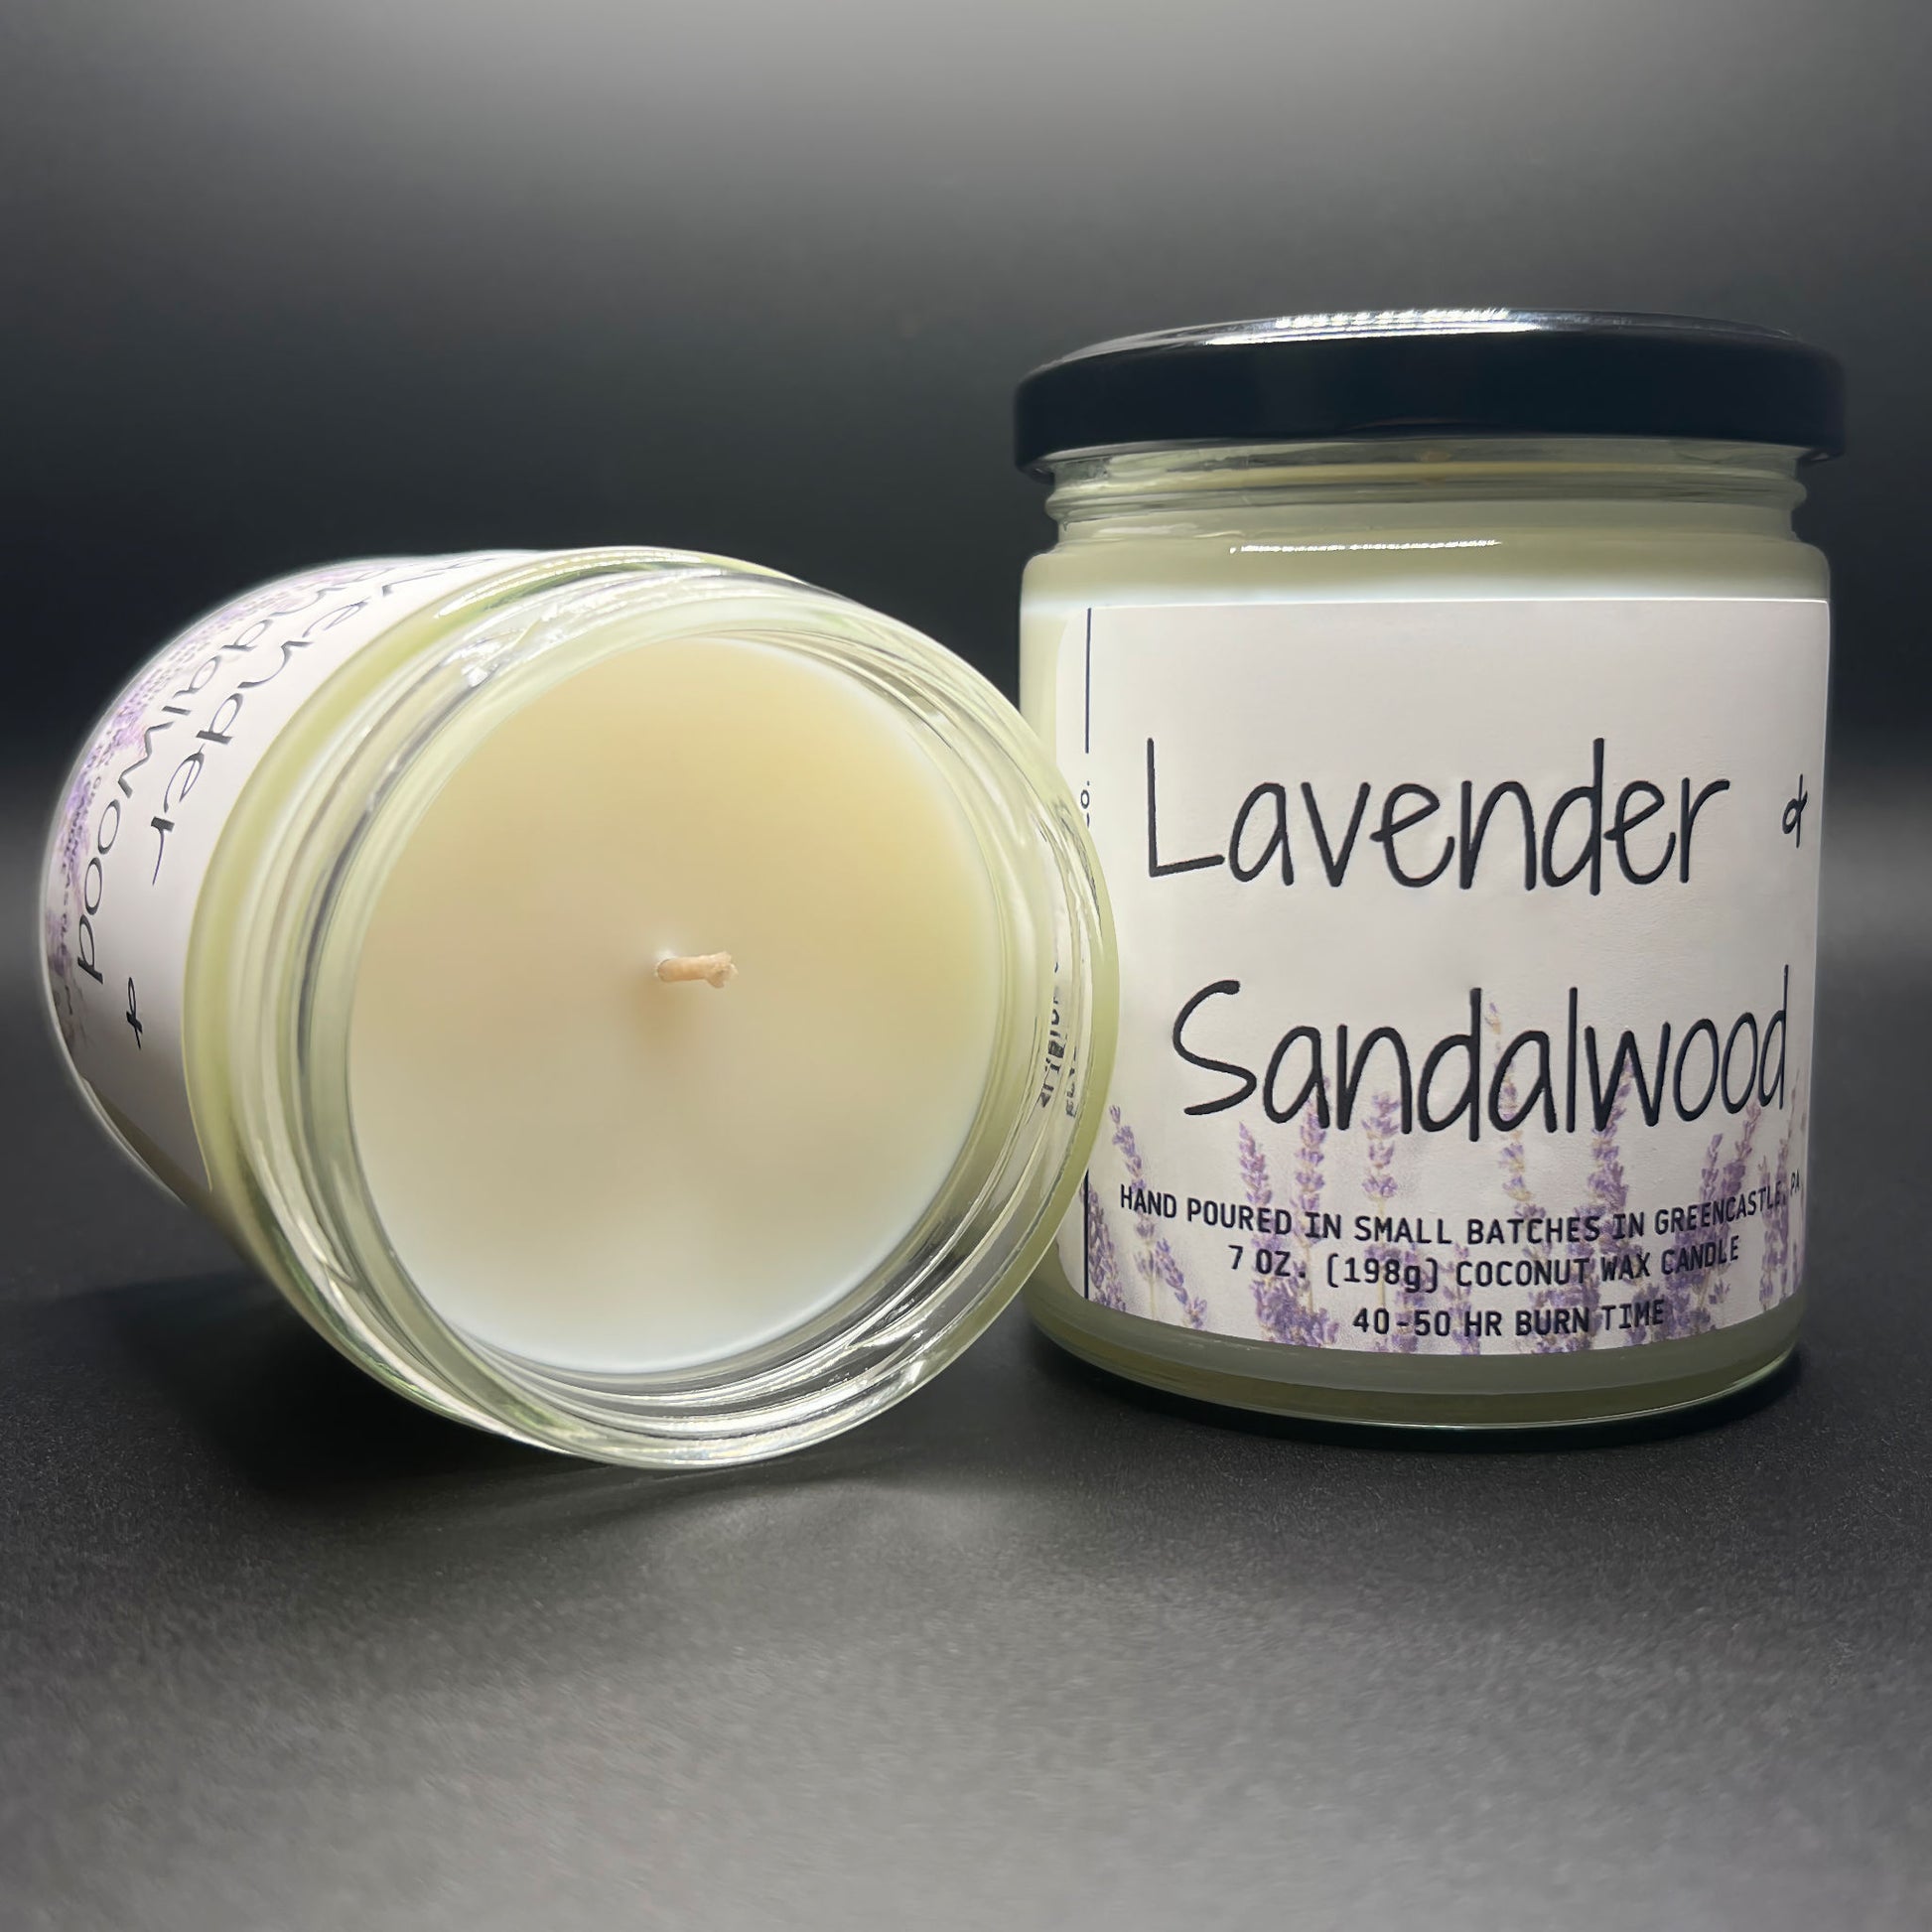 Top view of an open Lavender and Sandalwood coconut-soy candle by Elysium Candle Co., showcasing the smooth, creamy wax surface with a single centered wick. The edges of the label visible around the rim, hinting at hand-poured small batch craftsmanship.